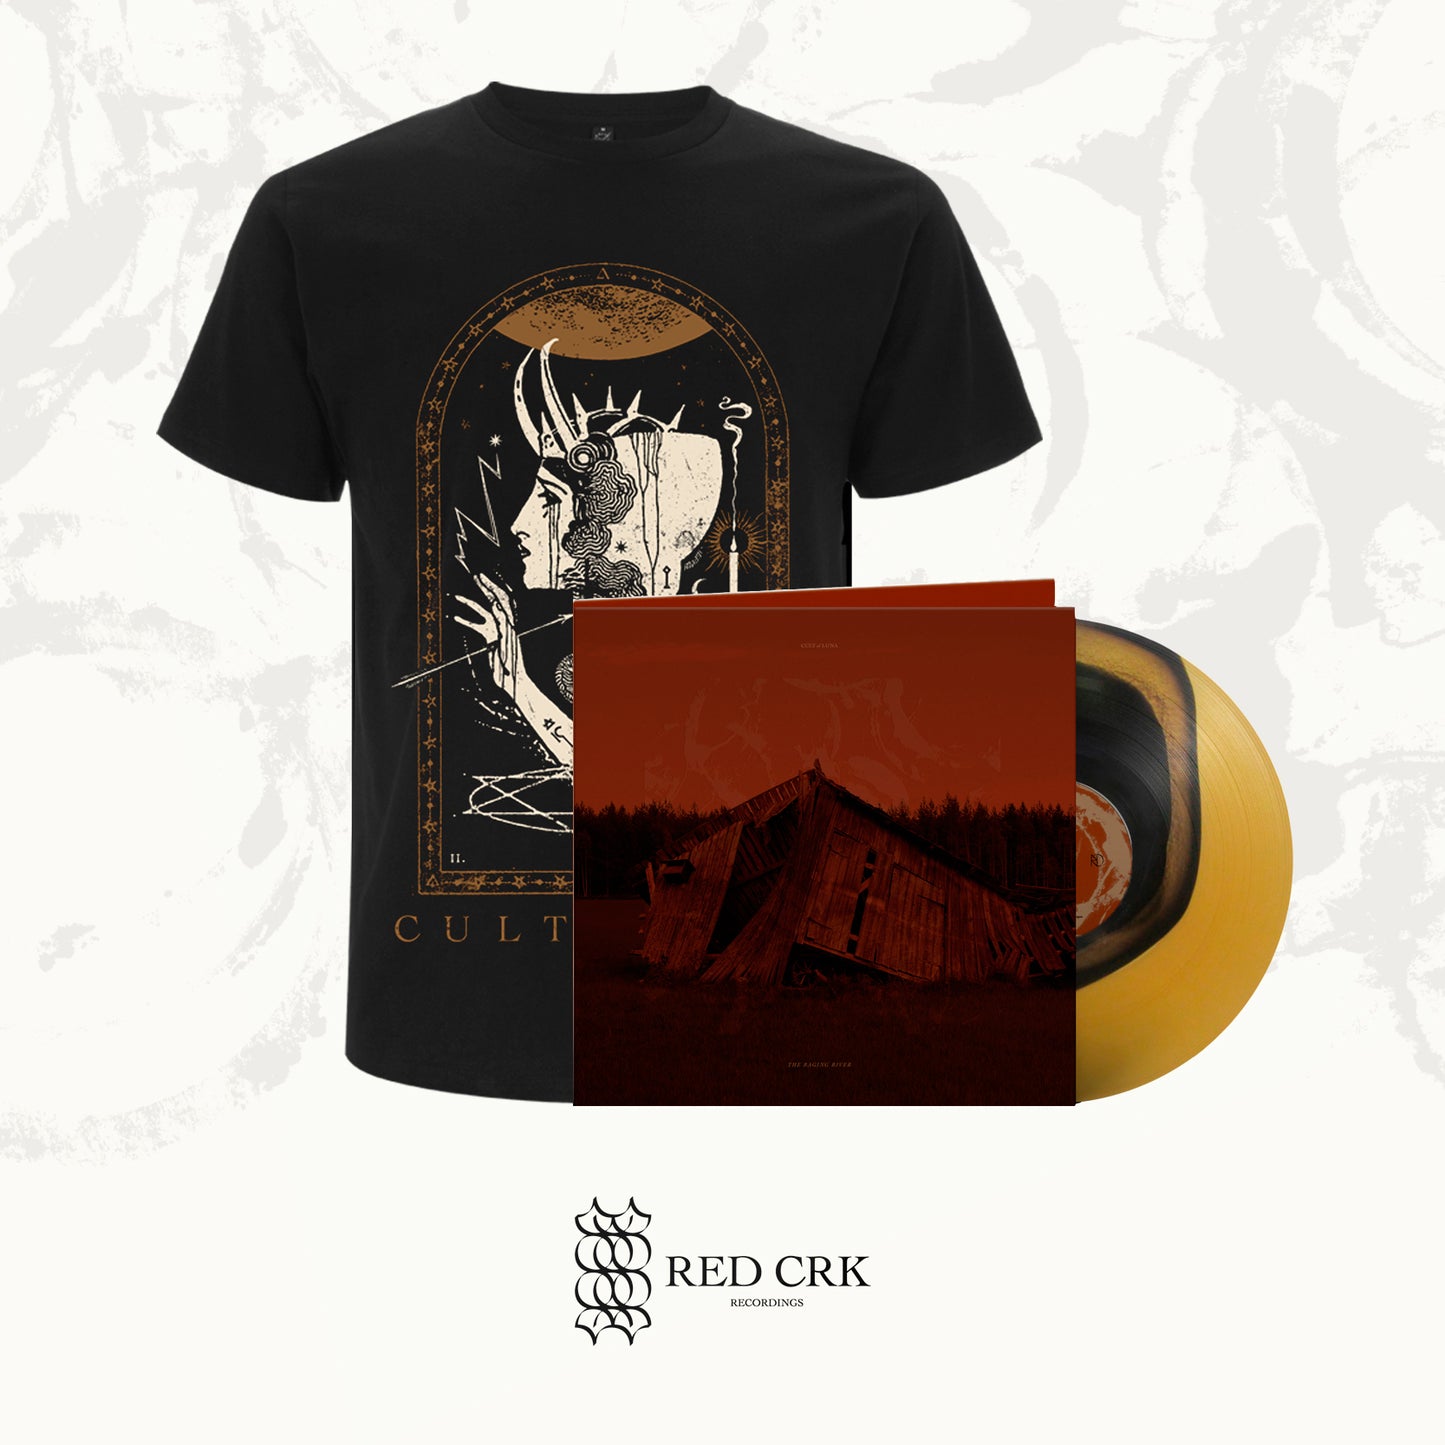 CULT OF LUNA - The Raging River LP Gtfold (Colour in Colour - Black and Beer) + Greek God  T-Shirt